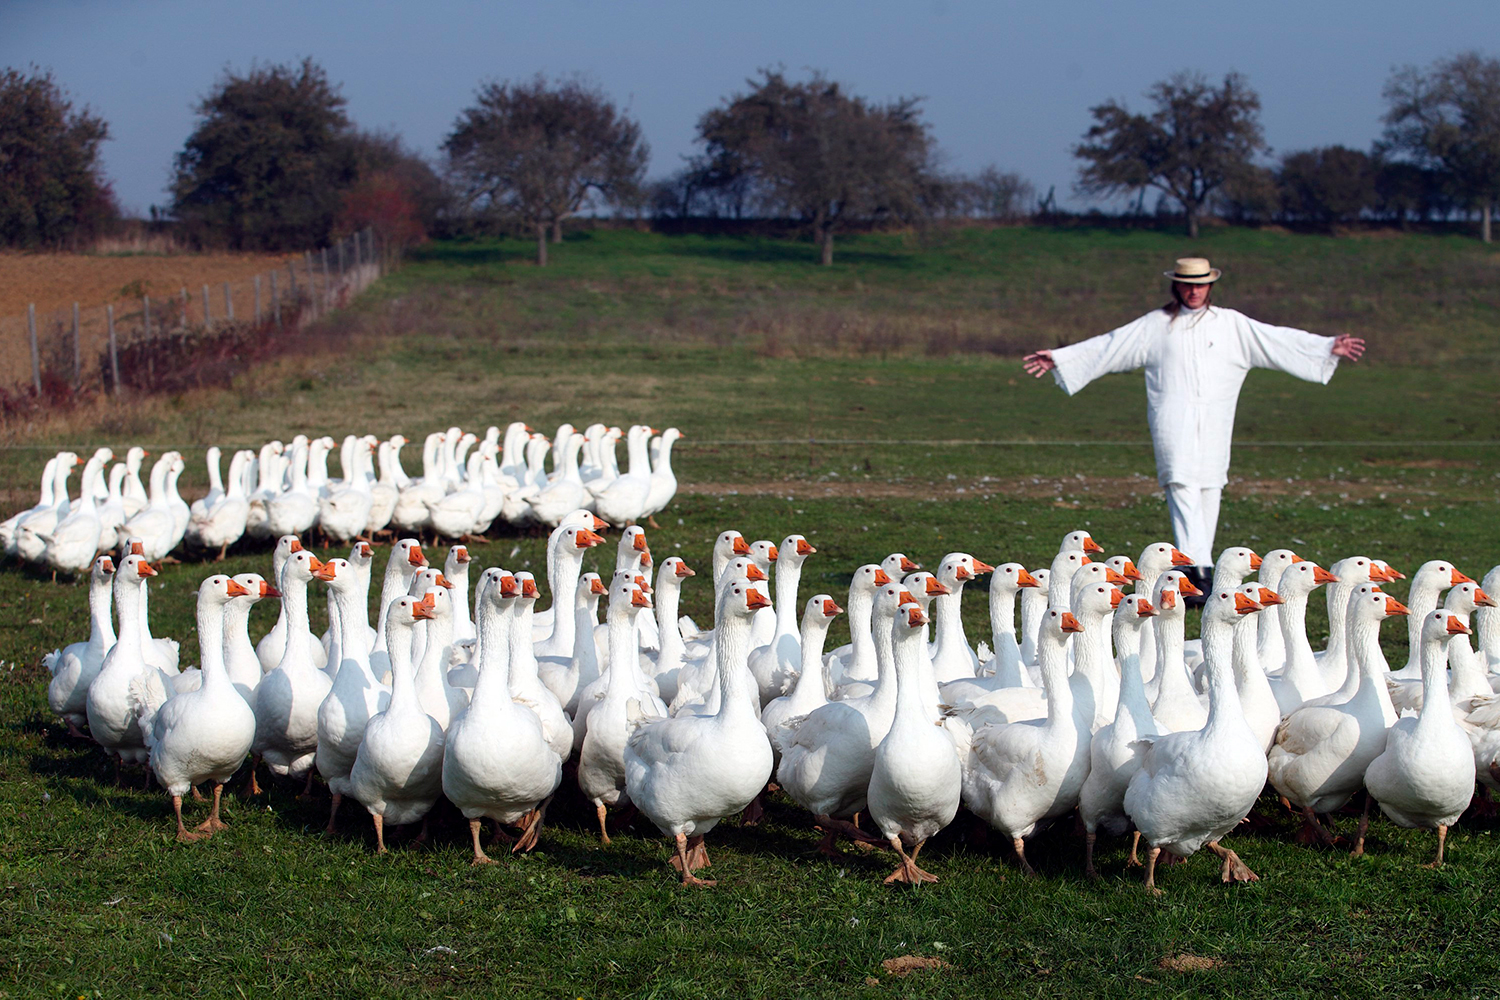 A party with many geese